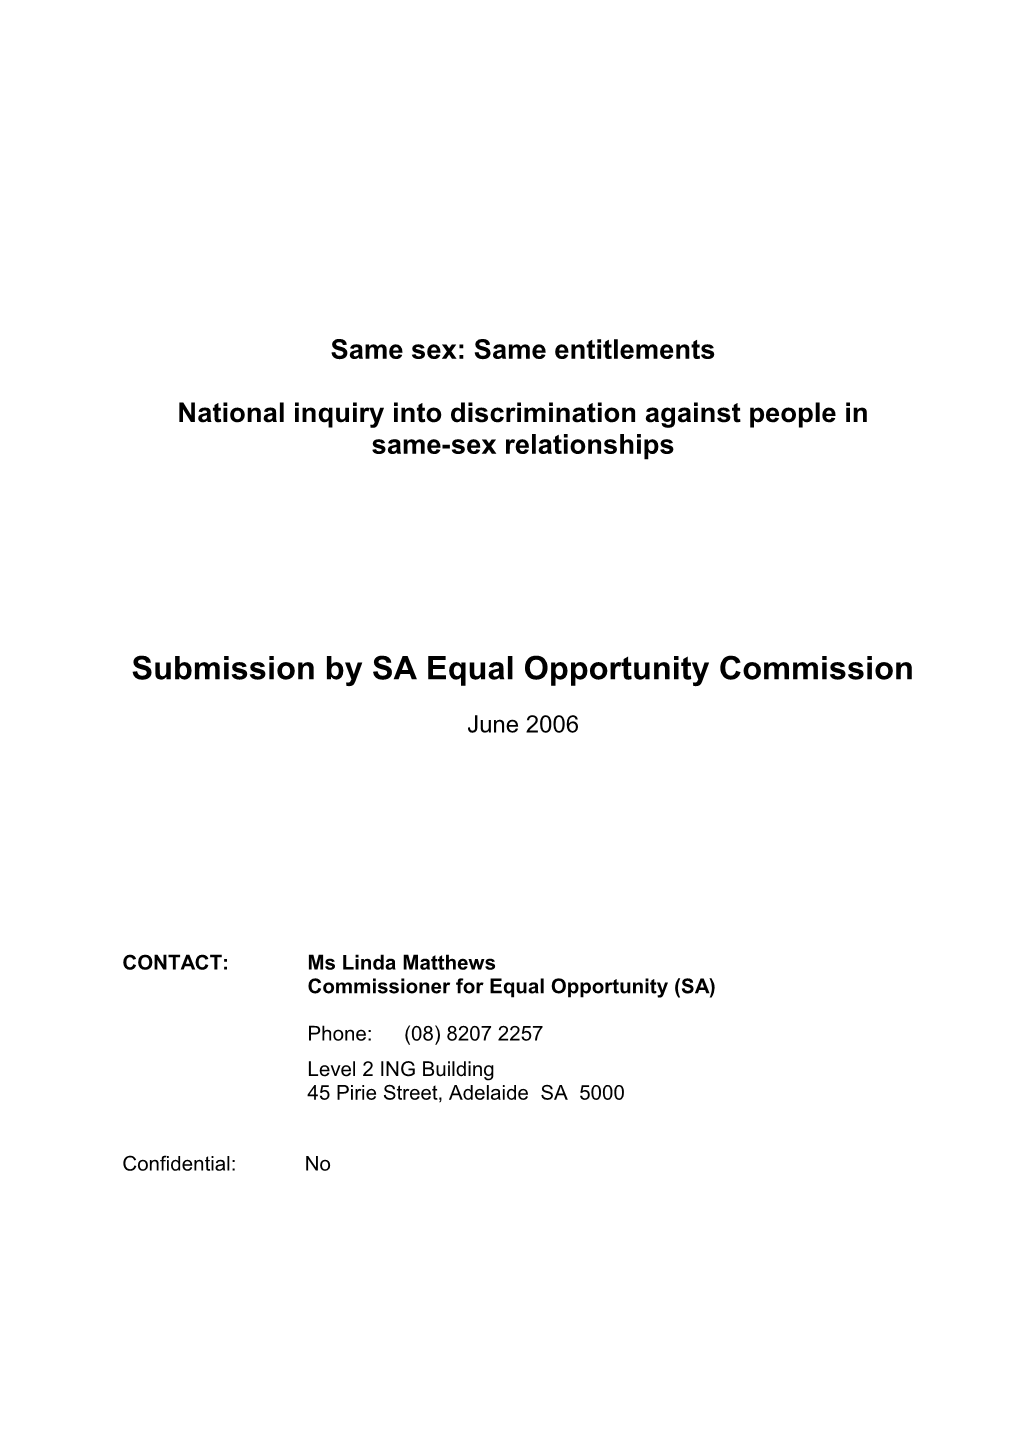 HREOC Inquiry Into Discrimination Against People in Same-Sex Relationships